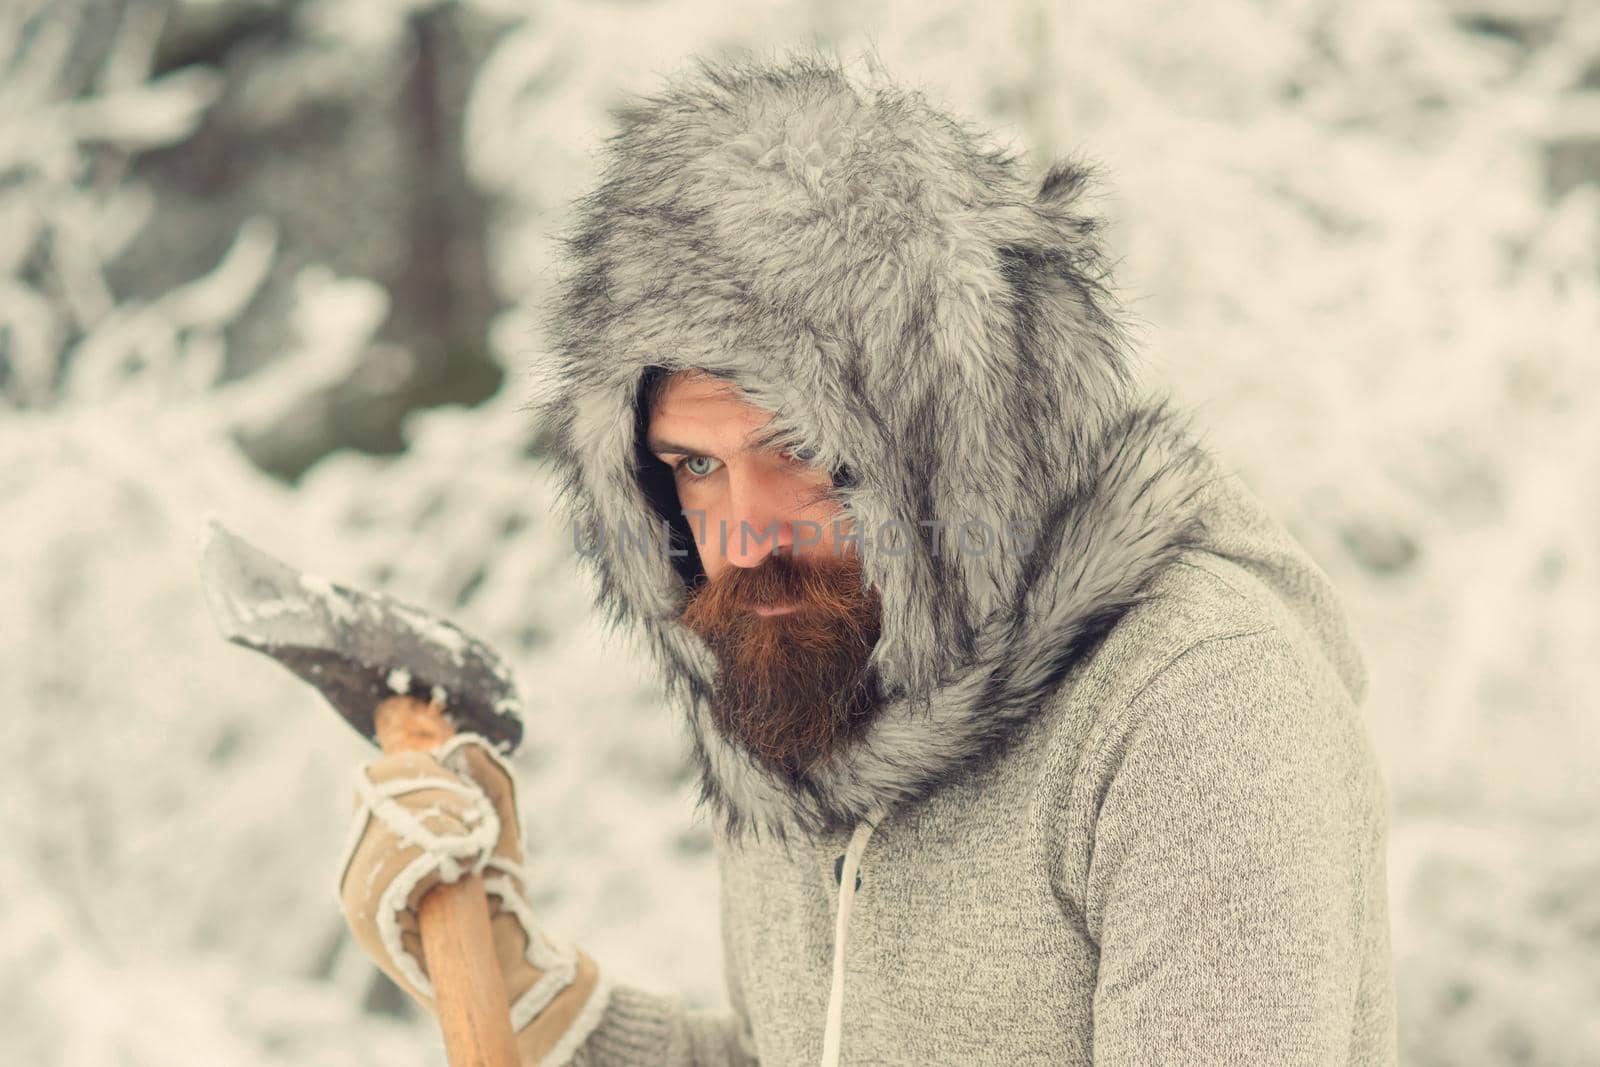 Man lumberjack with axe. Bearded man with axe in snowy forest. Angry face closeup